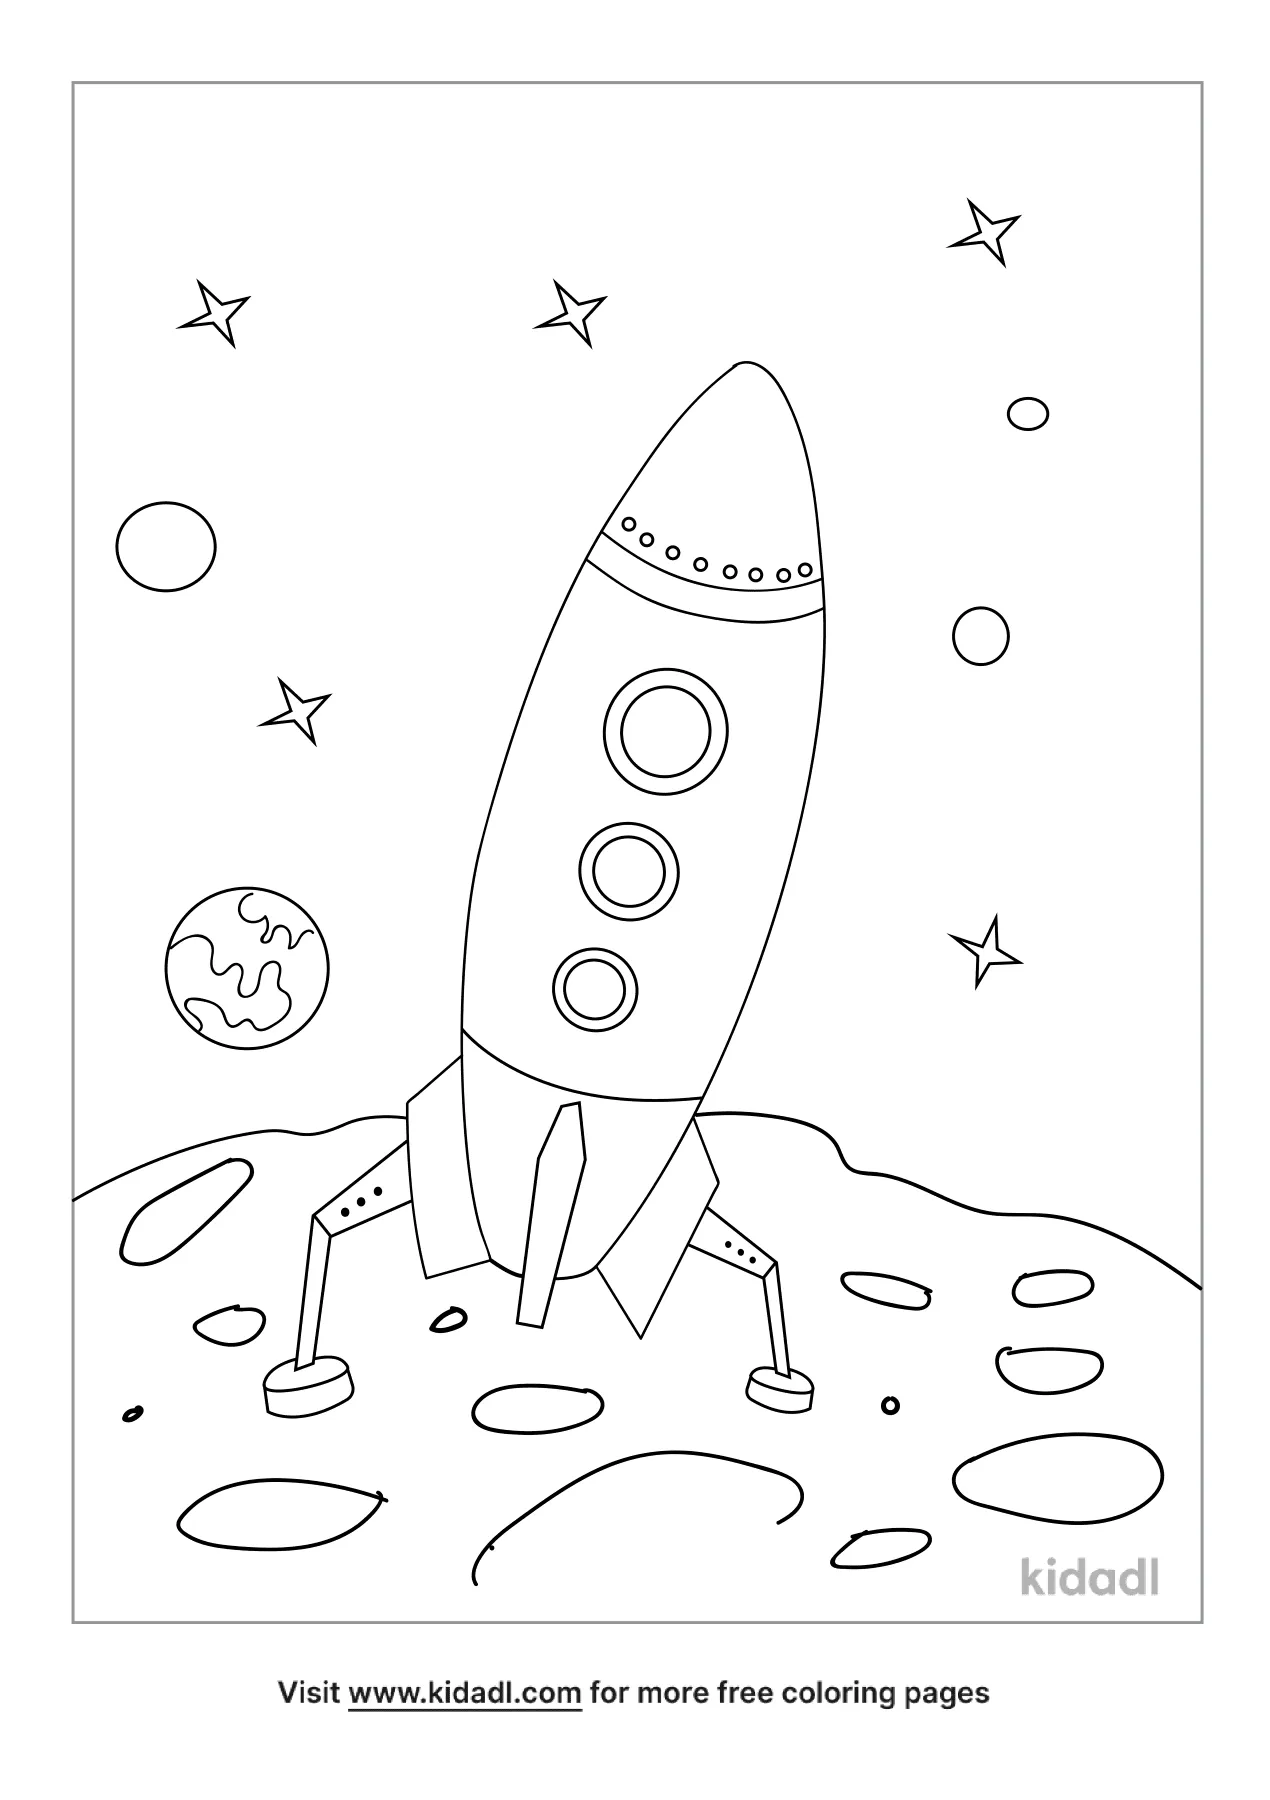 Free Moon And Spaceship Coloring Page | Coloring Page Printables | Kidadl